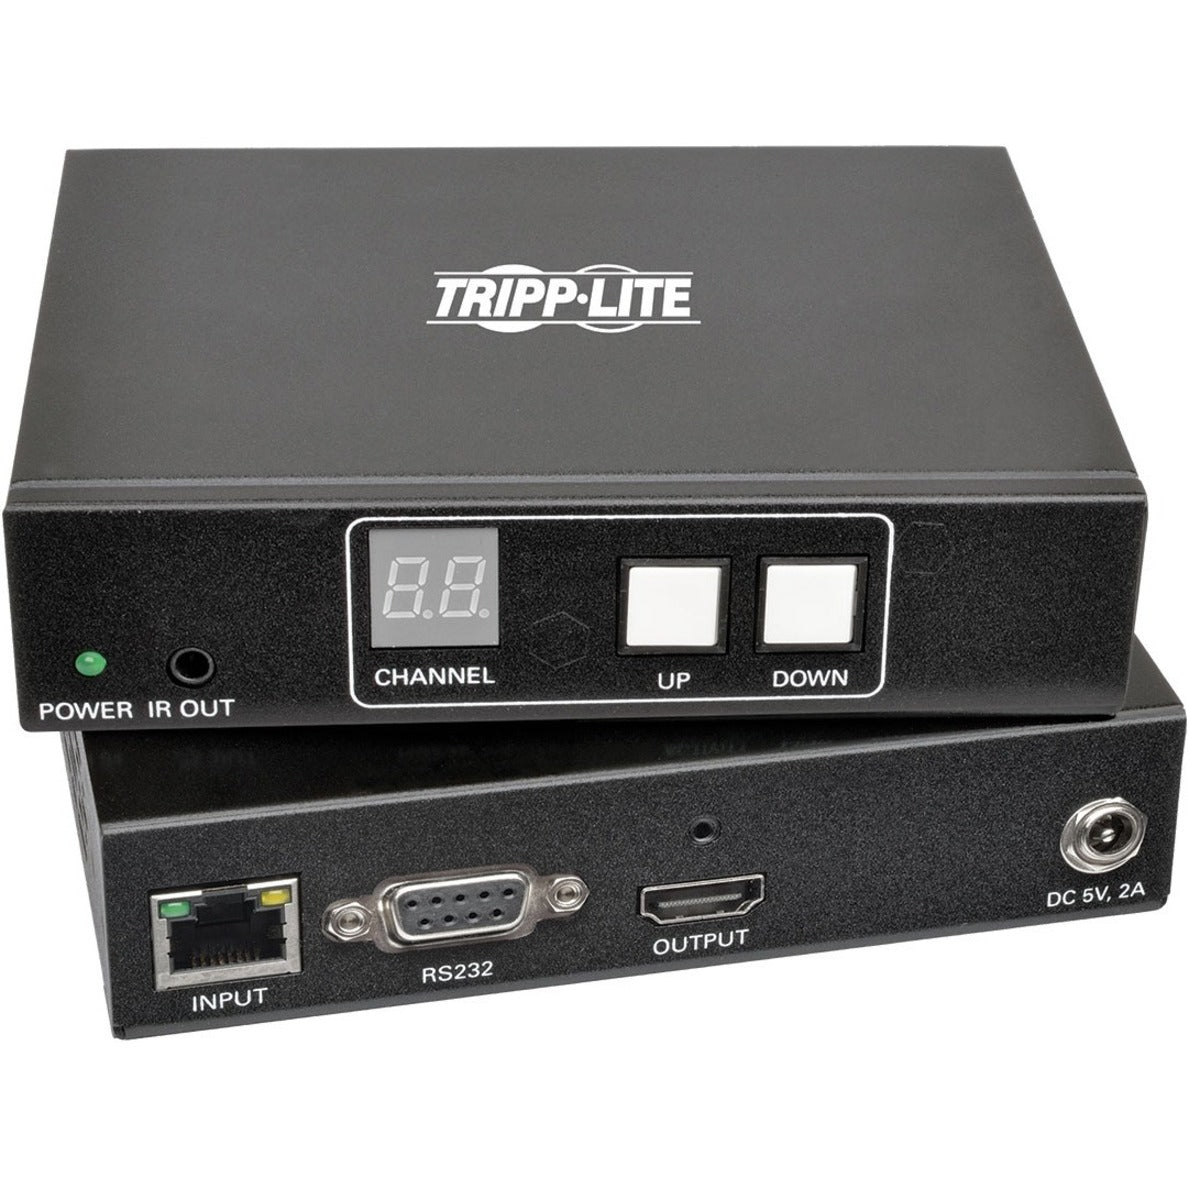 Tripp Lite B160-101-HDSI Video Extender Transmitter/Receiver, Full HD, 1920 x 1080, 1 Year Warranty, TAA Compliant, HDMI/DVI Audio/Video with RS-232 Serial